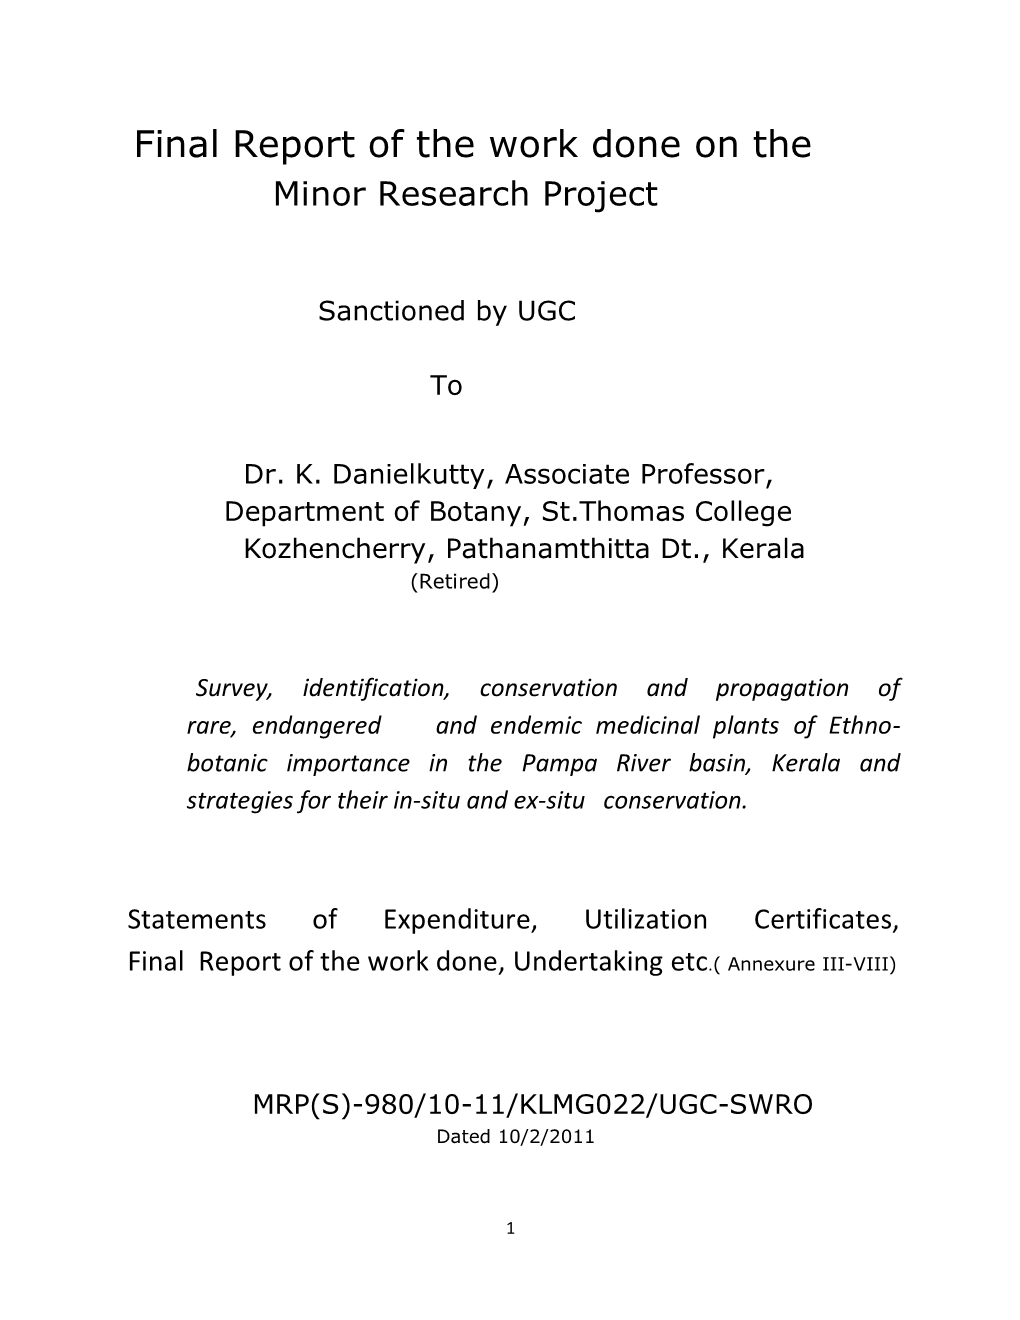 Final Report of the Work Done on the Minor Research Project